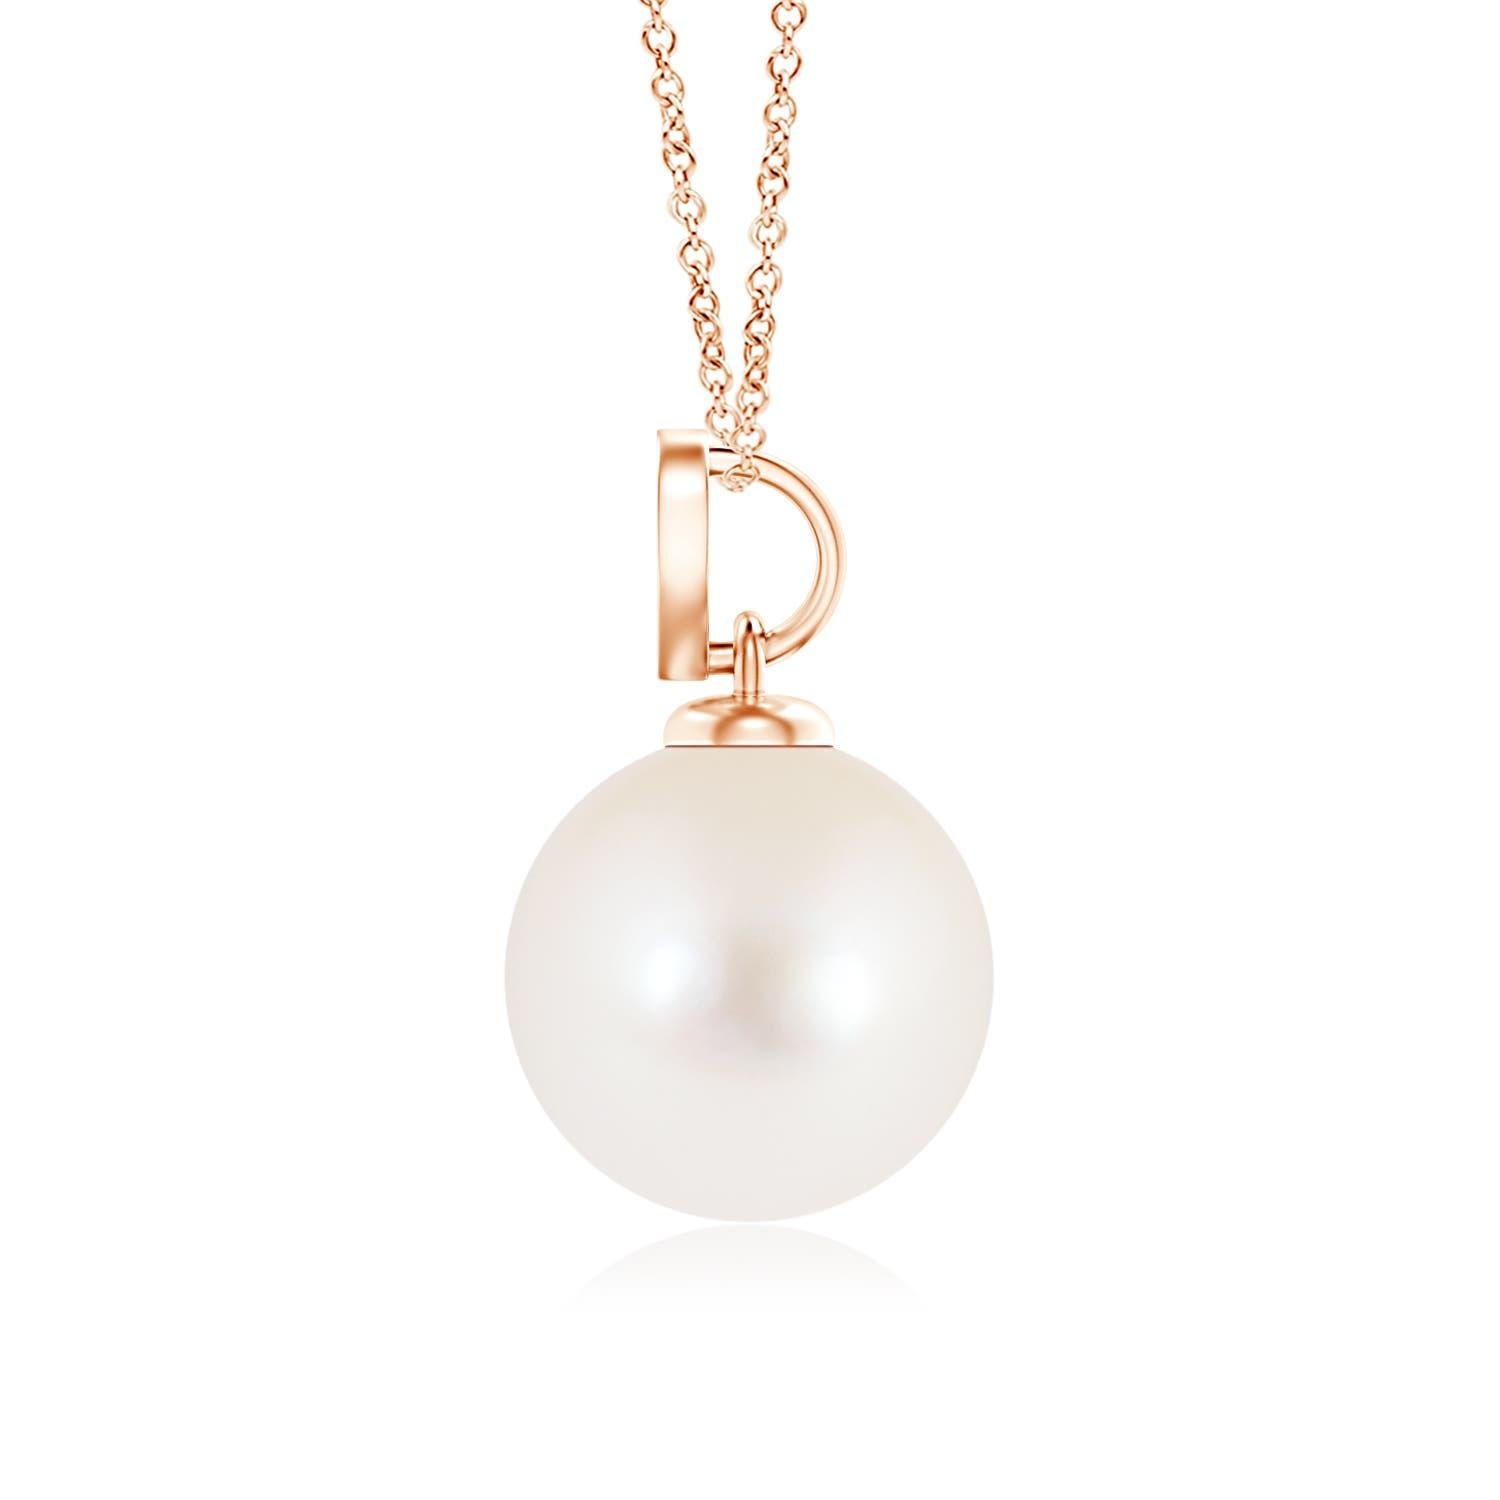 Nothing connotes love better than this charming diamond heart pendant in 14K rose gold. It features a round Freshwater cultured pearl that illuminates with its delightful hue, while the diamond studded heart motif adds a romantic touch to the